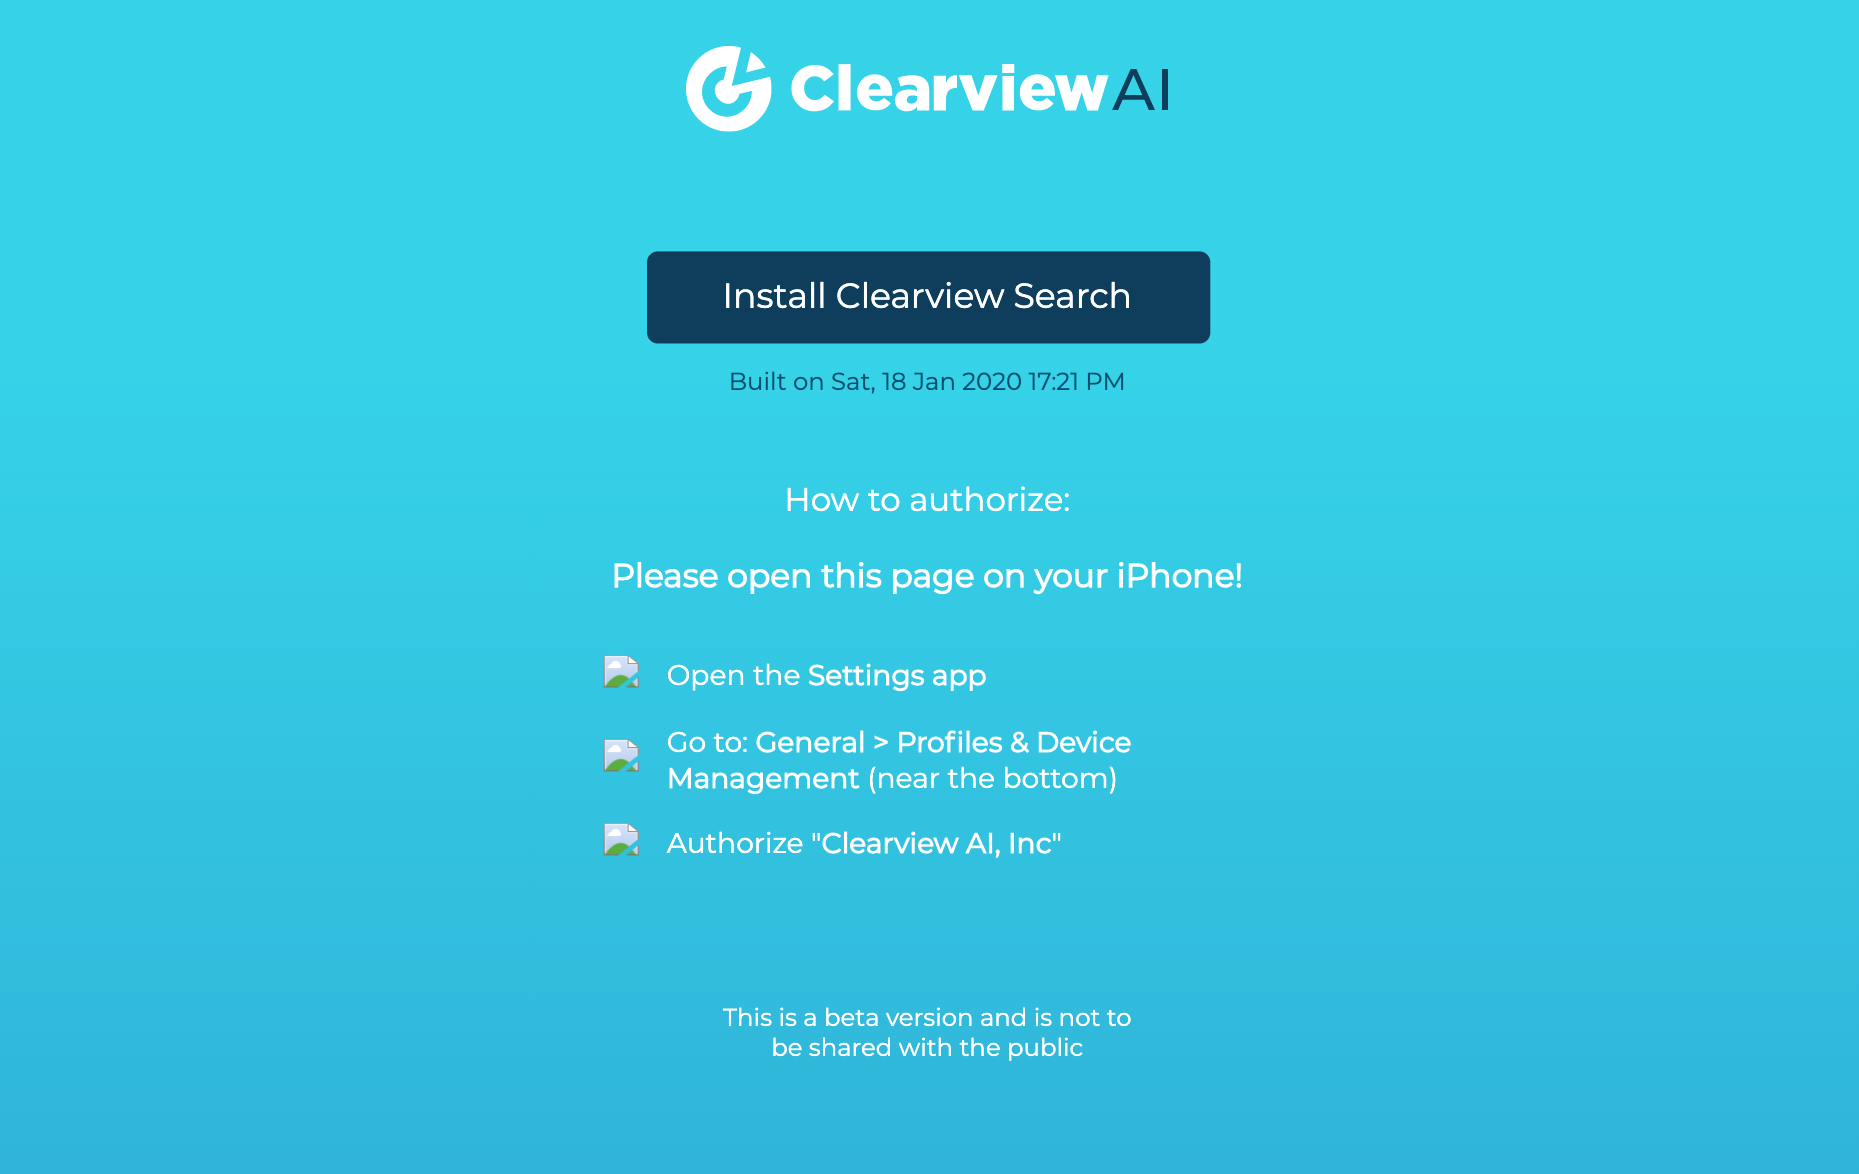 Apple has blocked Clearview AI’s iPhone app for violating its rules